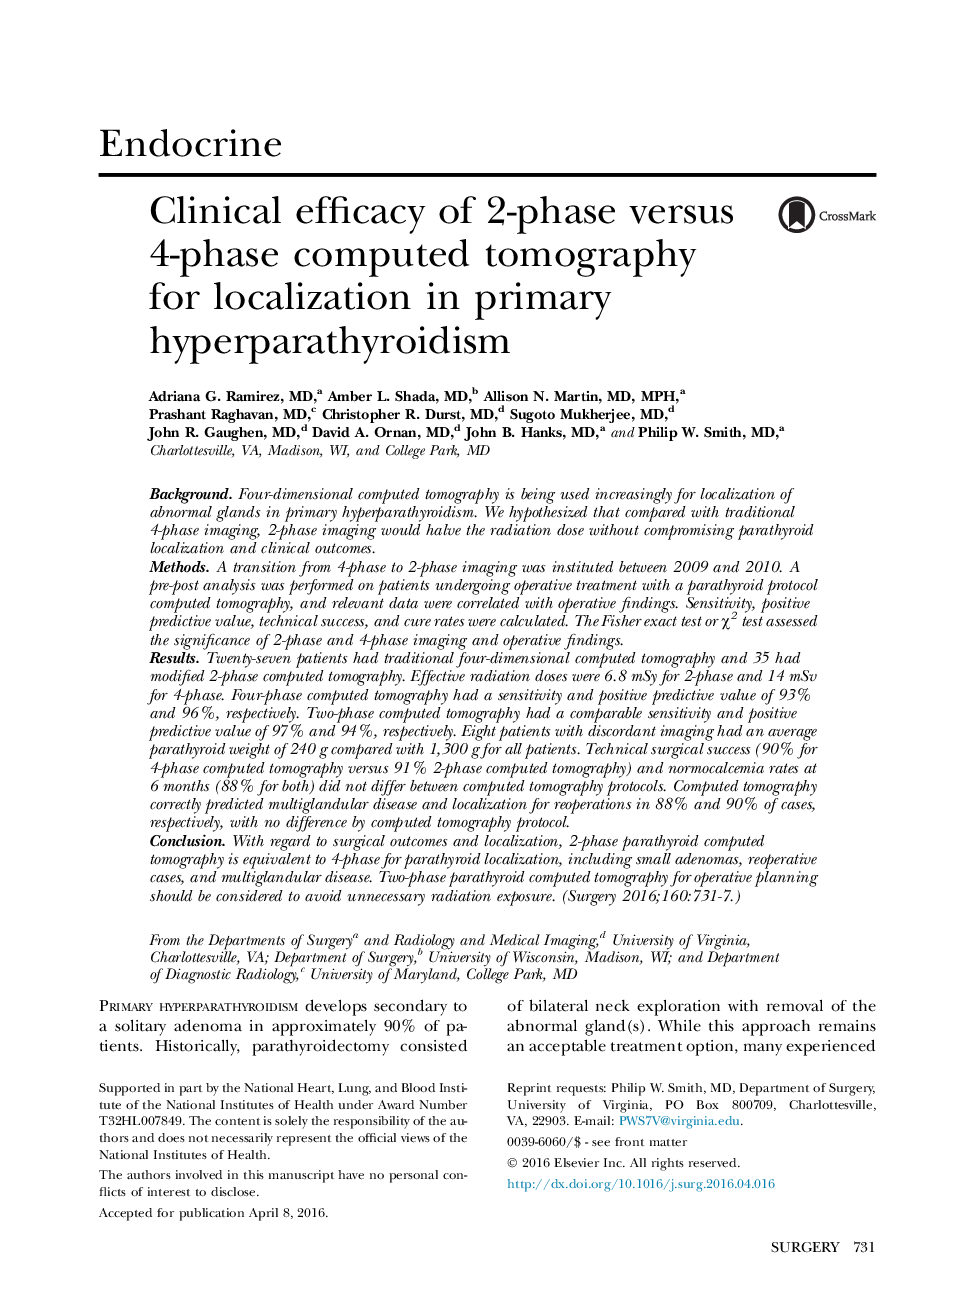 EndocrineClinical efficacy of 2-phase versus 4-phase computed tomography for localization in primary hyperparathyroidism